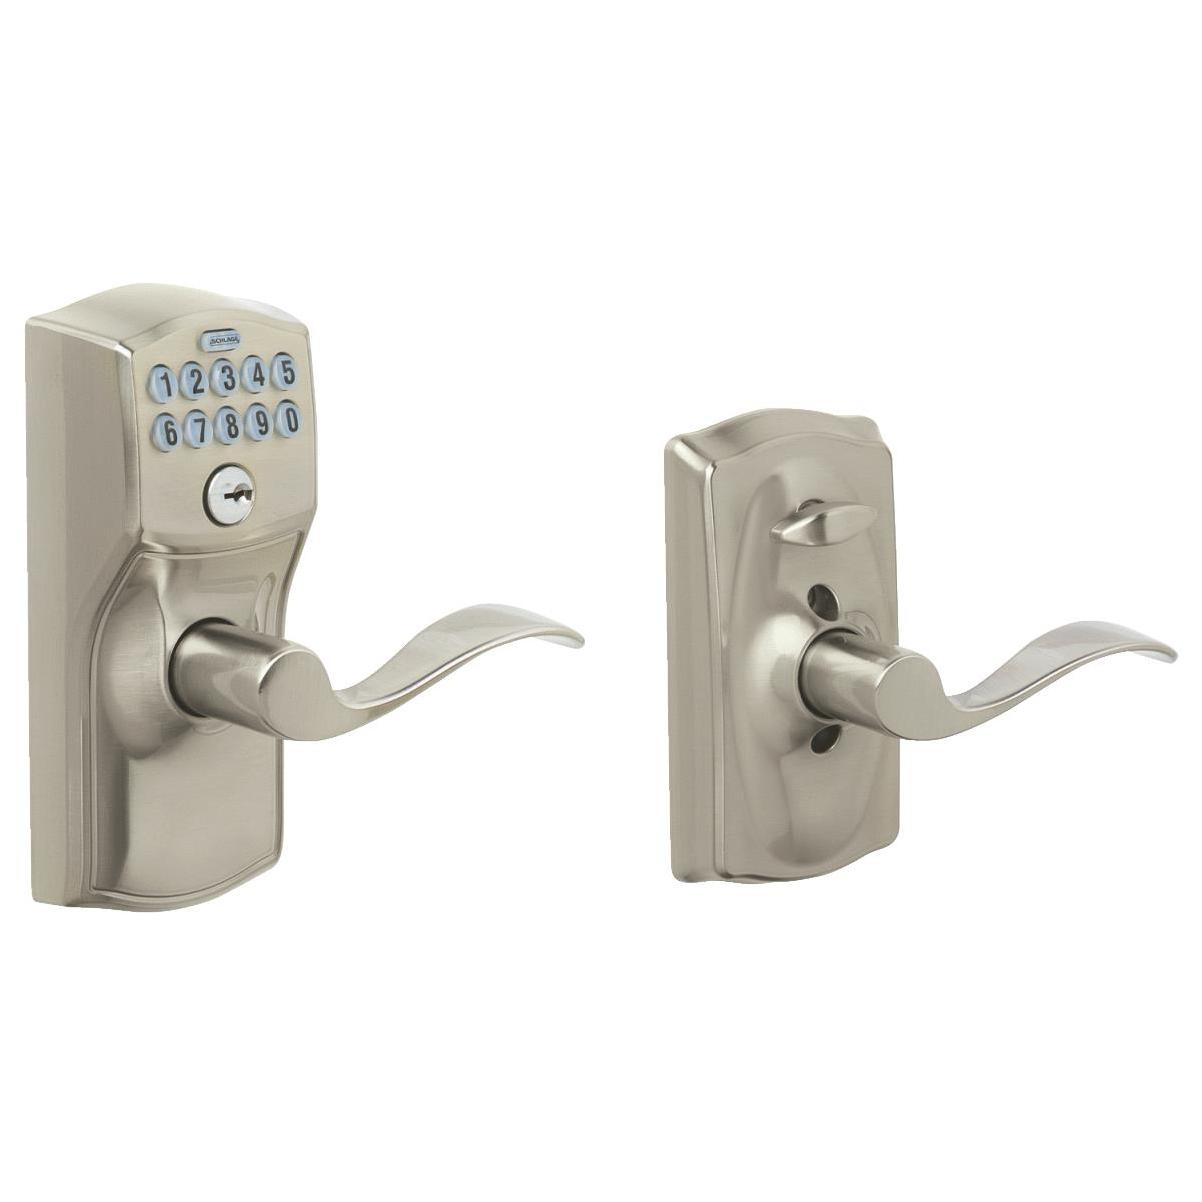 Schlage Camelot Lever Satin Nickel Electronic Keypad Entry Lock